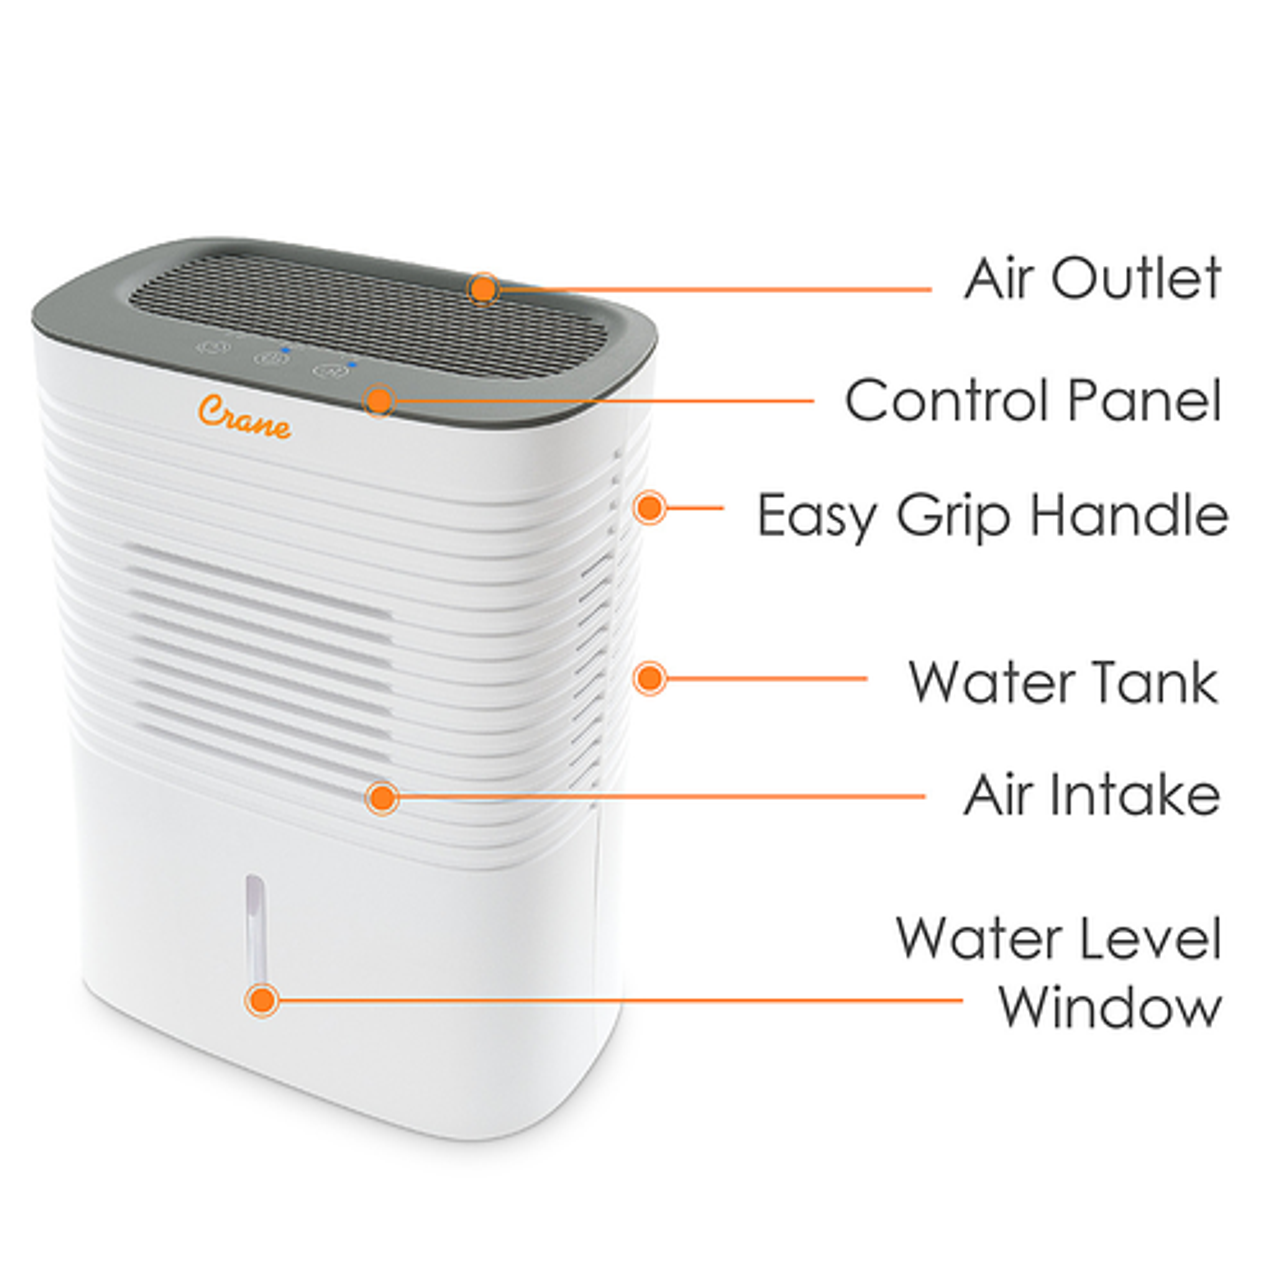 CRANE - 4 Pint Compact Dehumidifier with 2 Settings for Small to Medium Rooms up to 300 sq. ft. - White